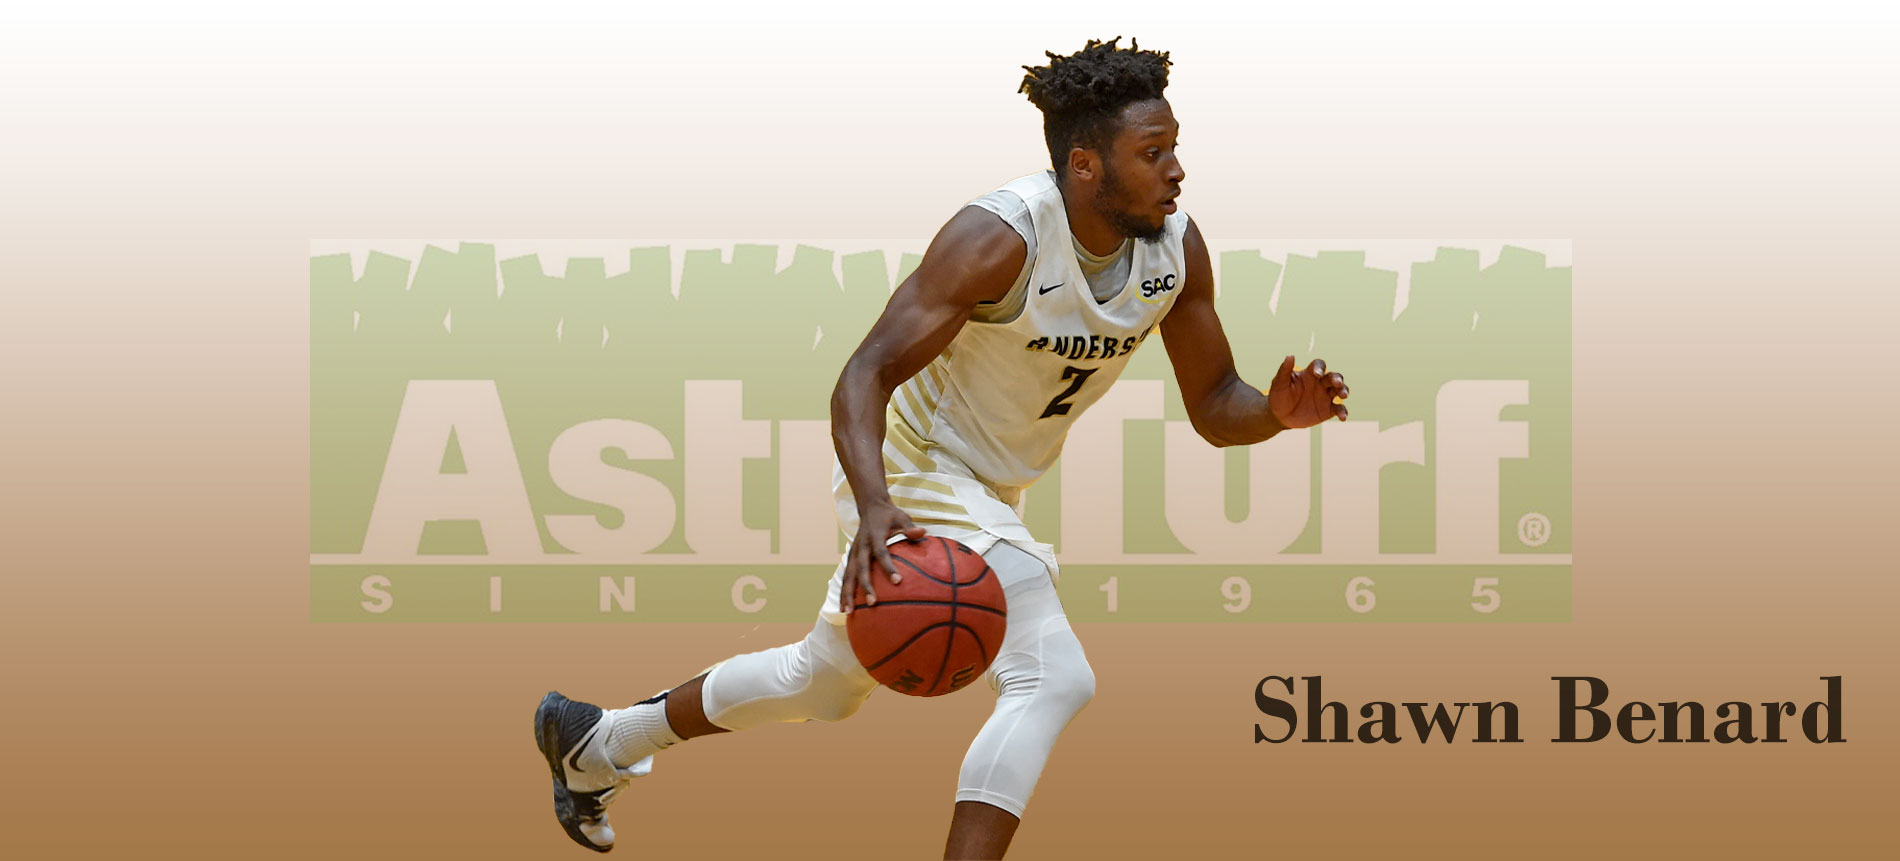 Benard Earns South Atlantic Conference AstroTurf Men’s Basketball Player of the Week